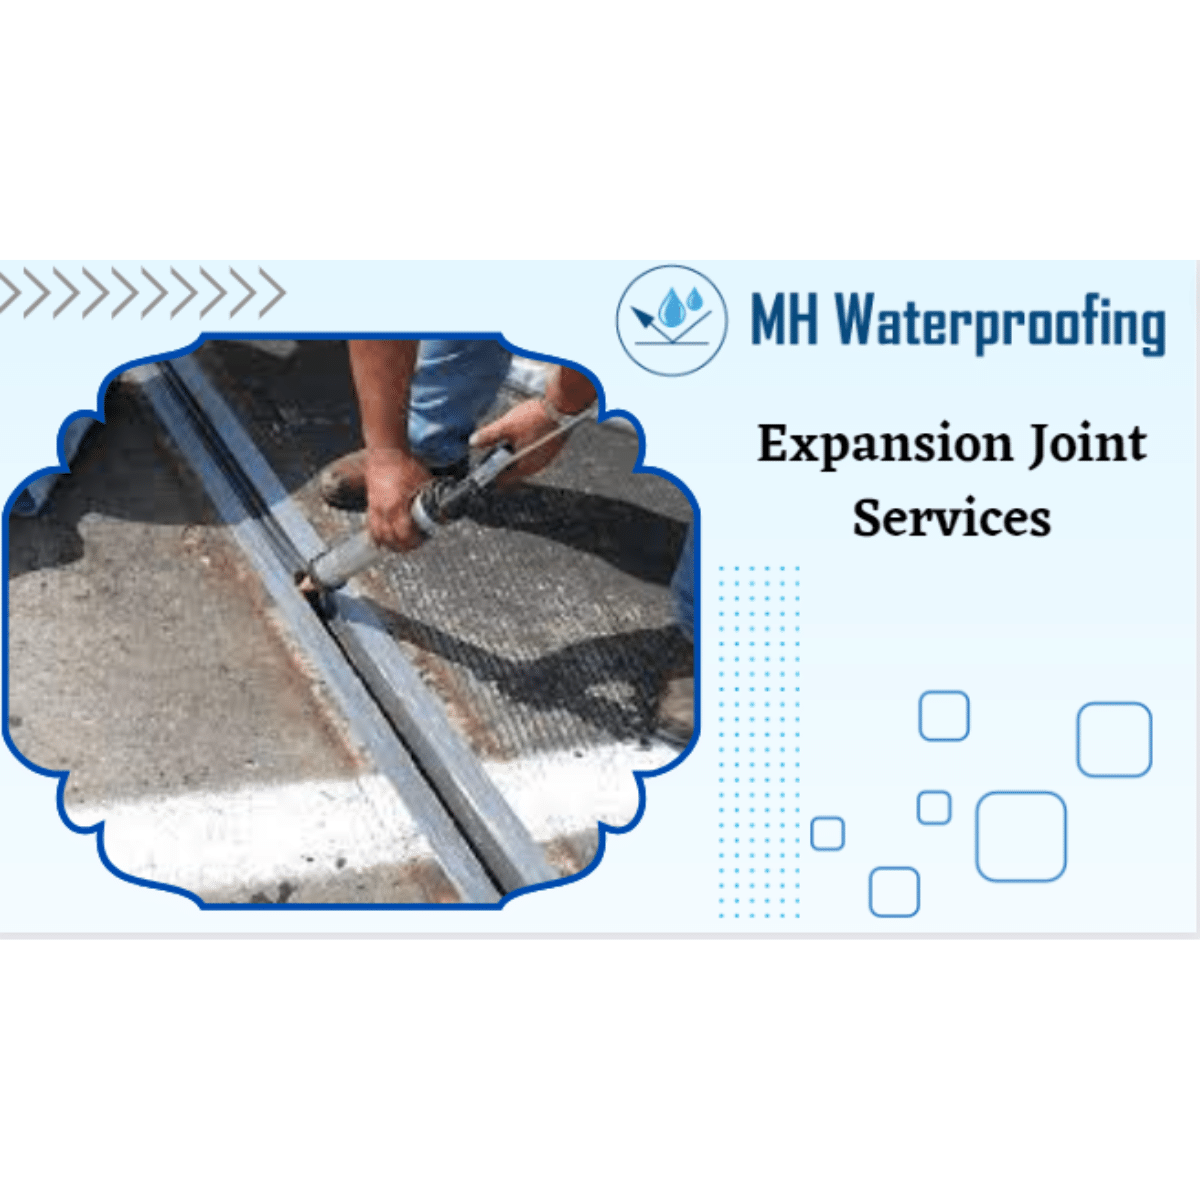 Expansion Joint Services in Hyderabad | MH Water Proofing Services